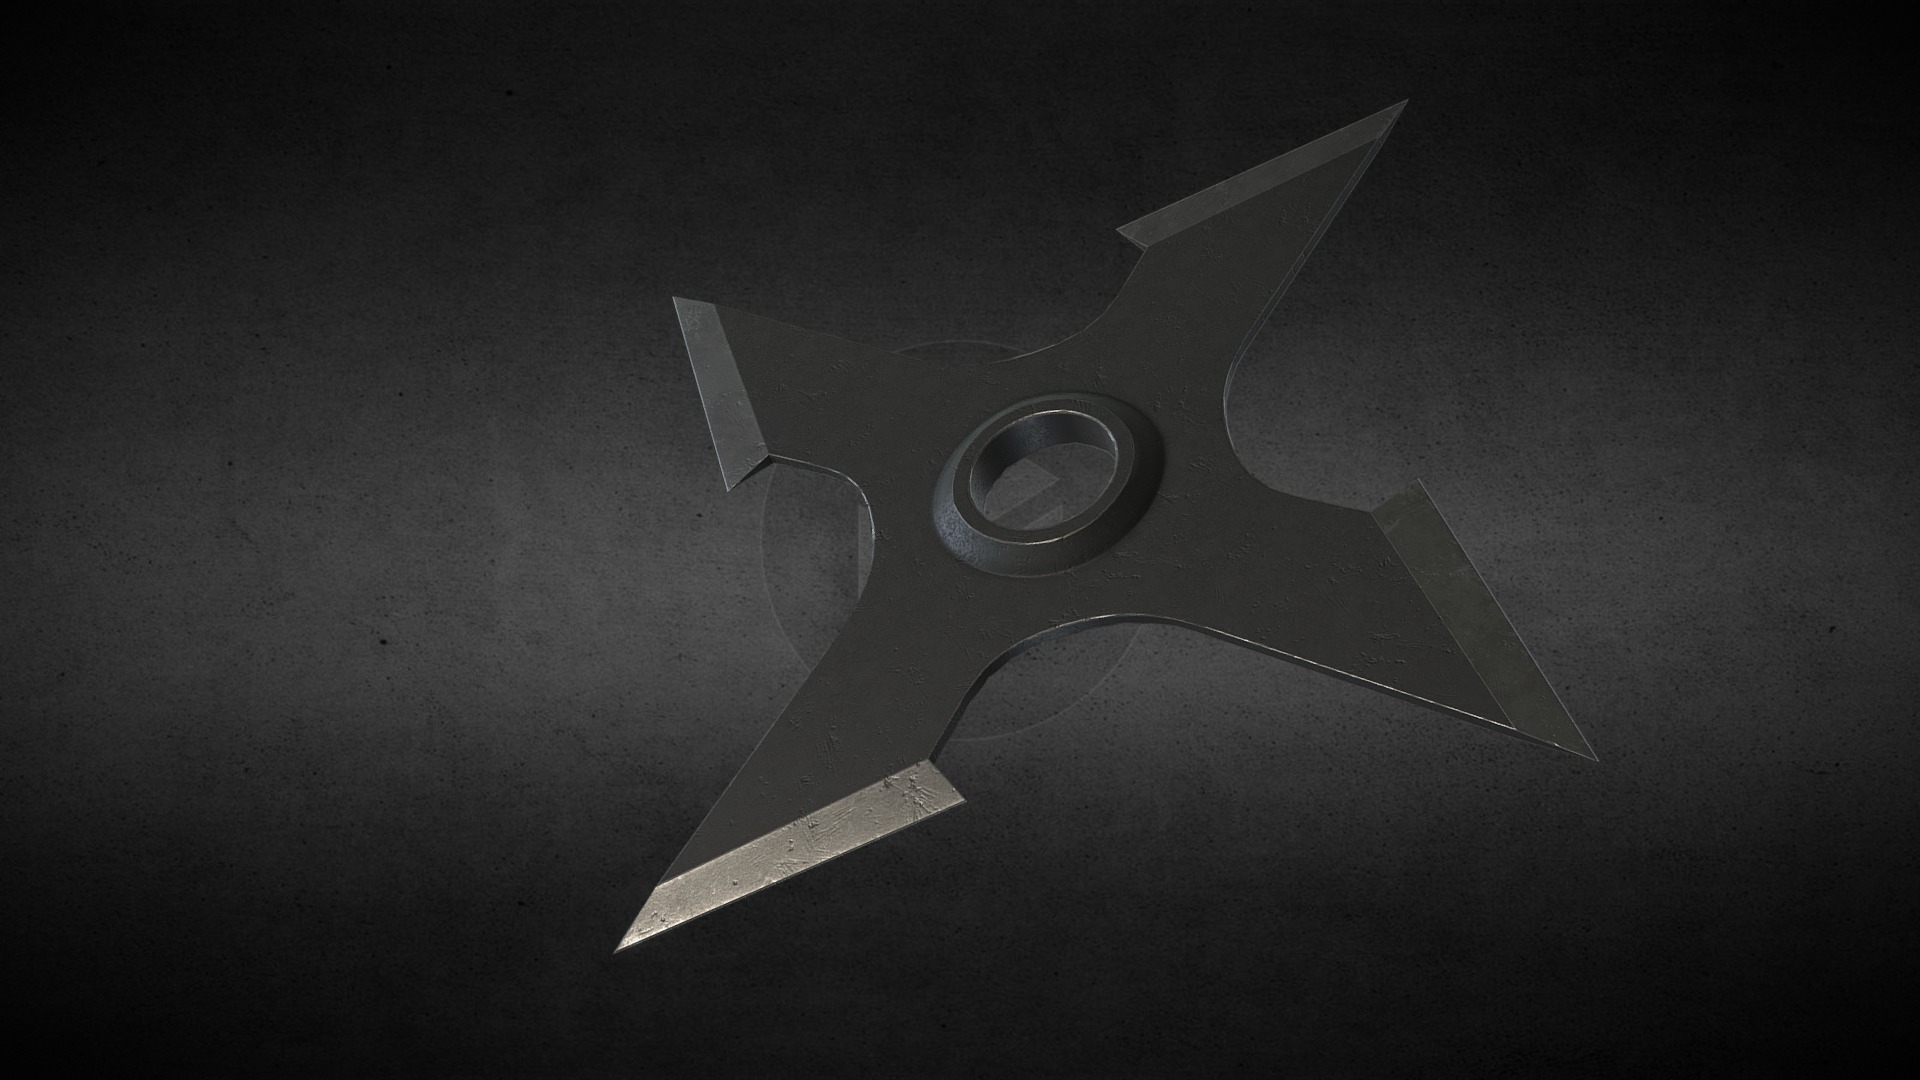 3D model Ninja’s Shuriken 5 - This is a 3D model of the Ninja's Shuriken 5. The 3D model is about a silver airplane with a black background.